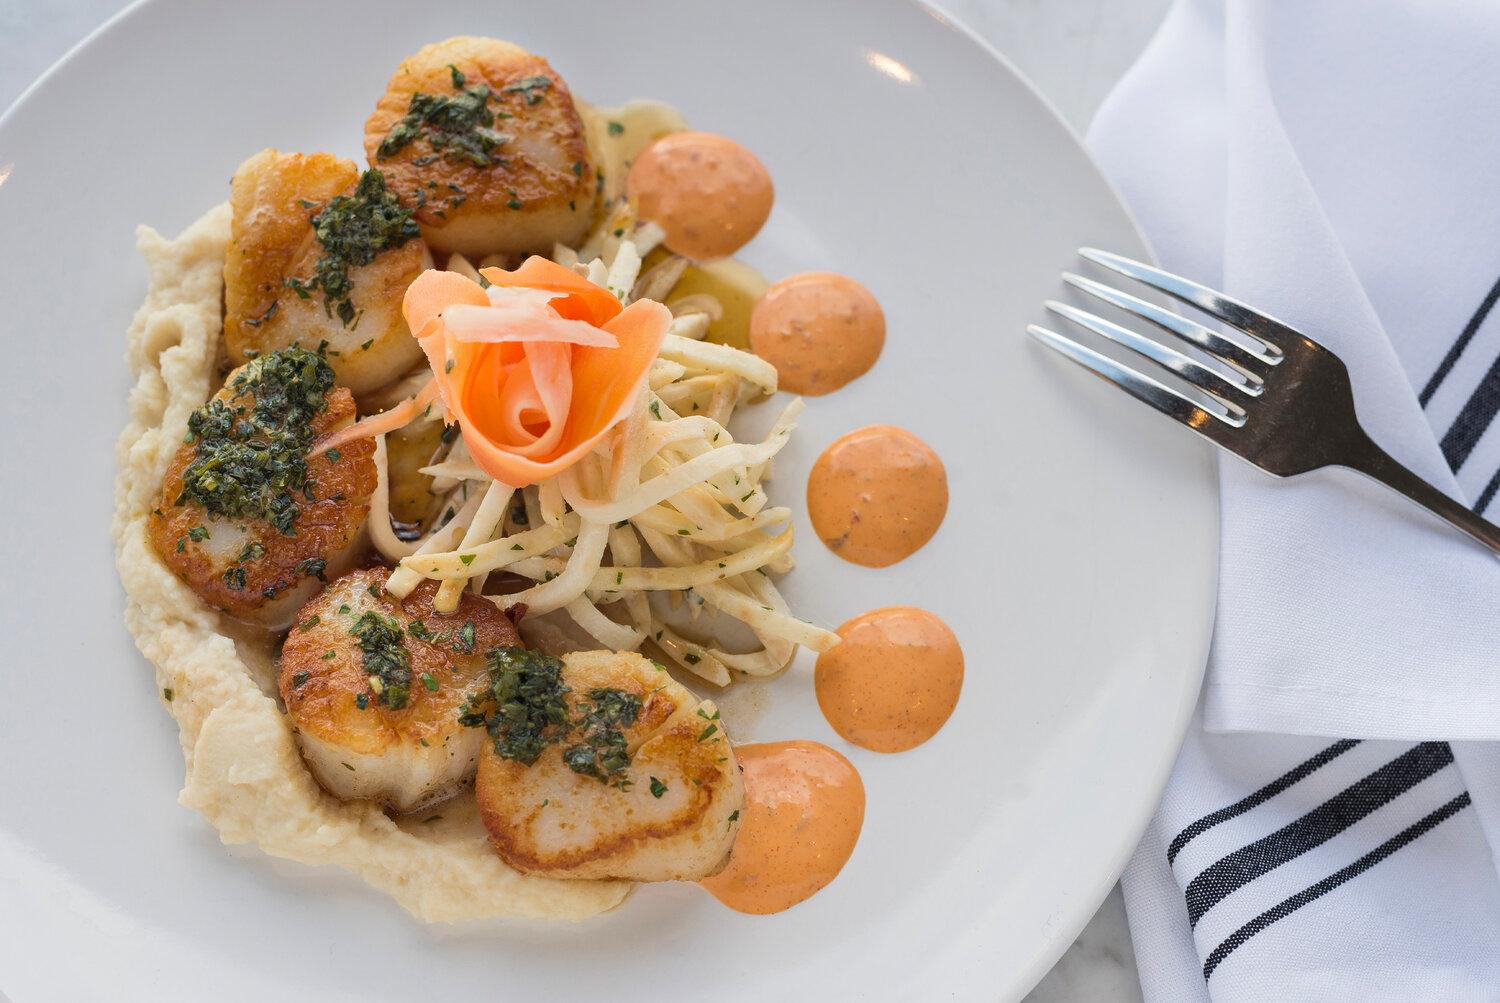 Scallops served with style at Bywater